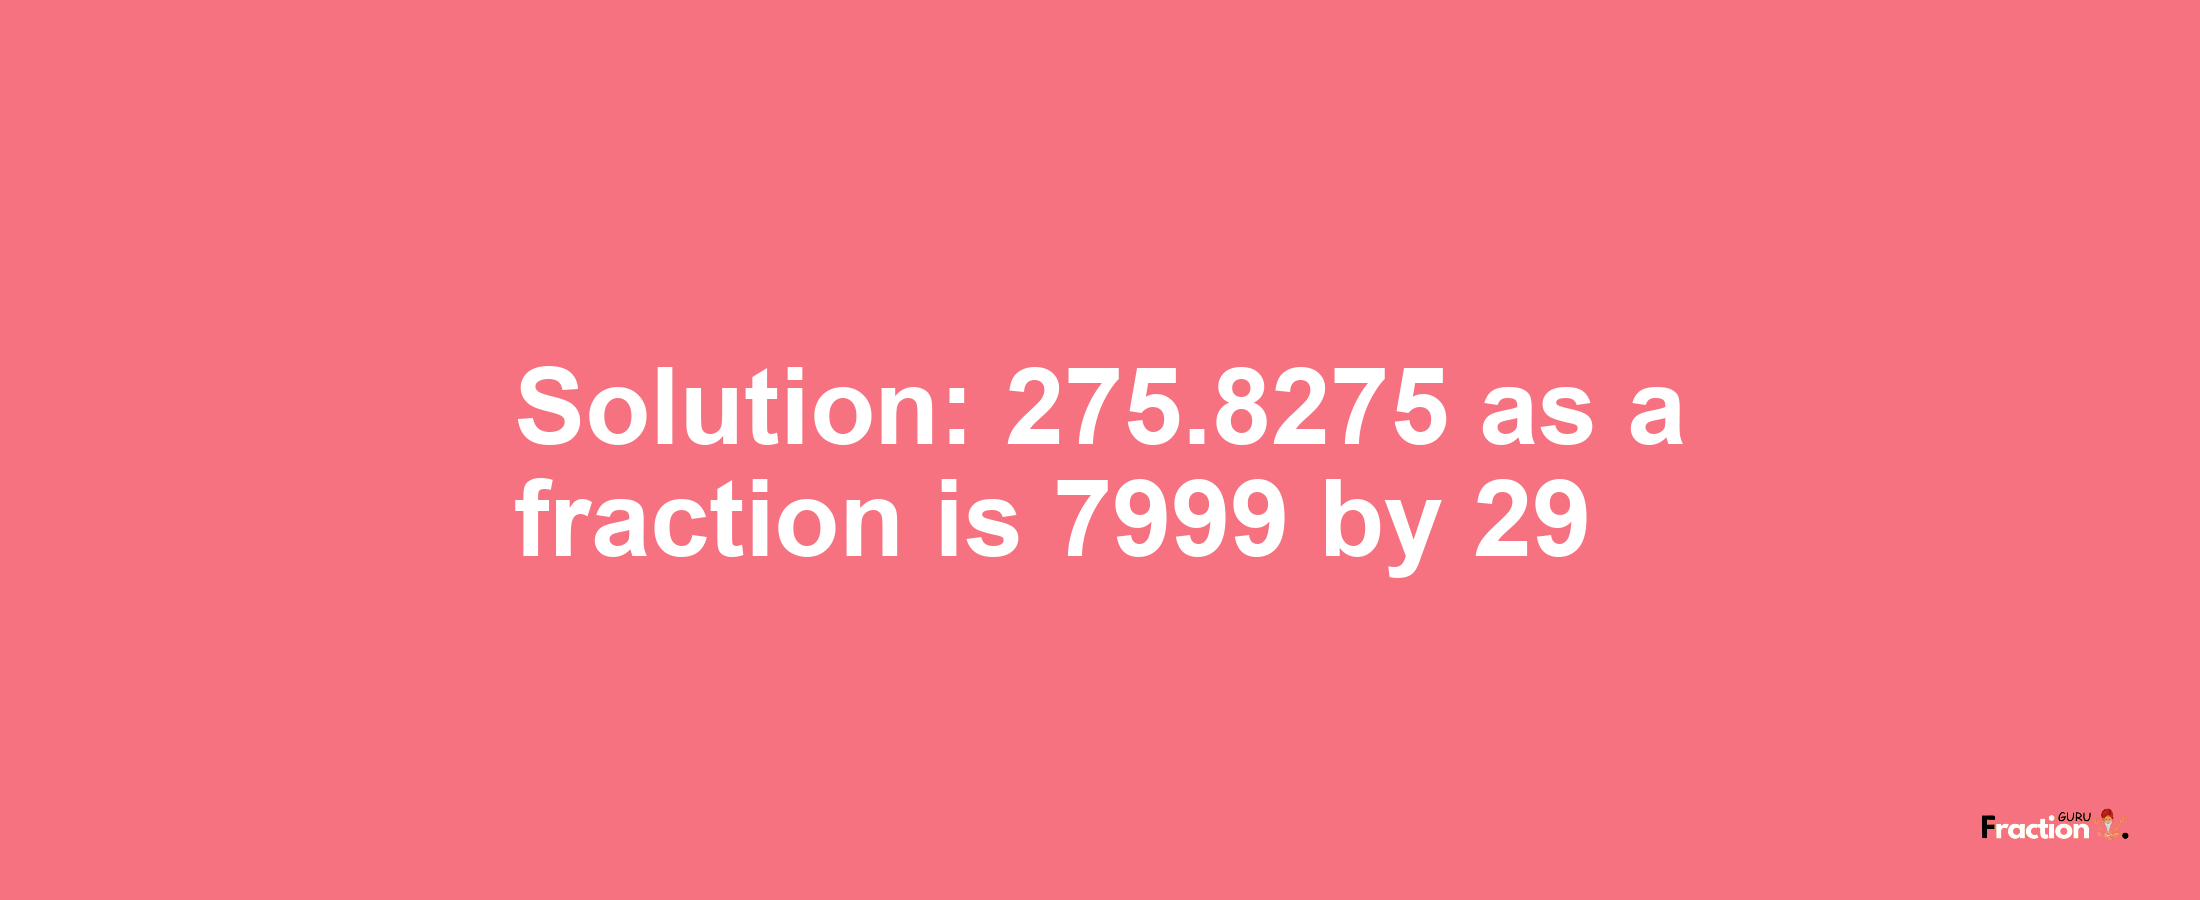 Solution:275.8275 as a fraction is 7999/29